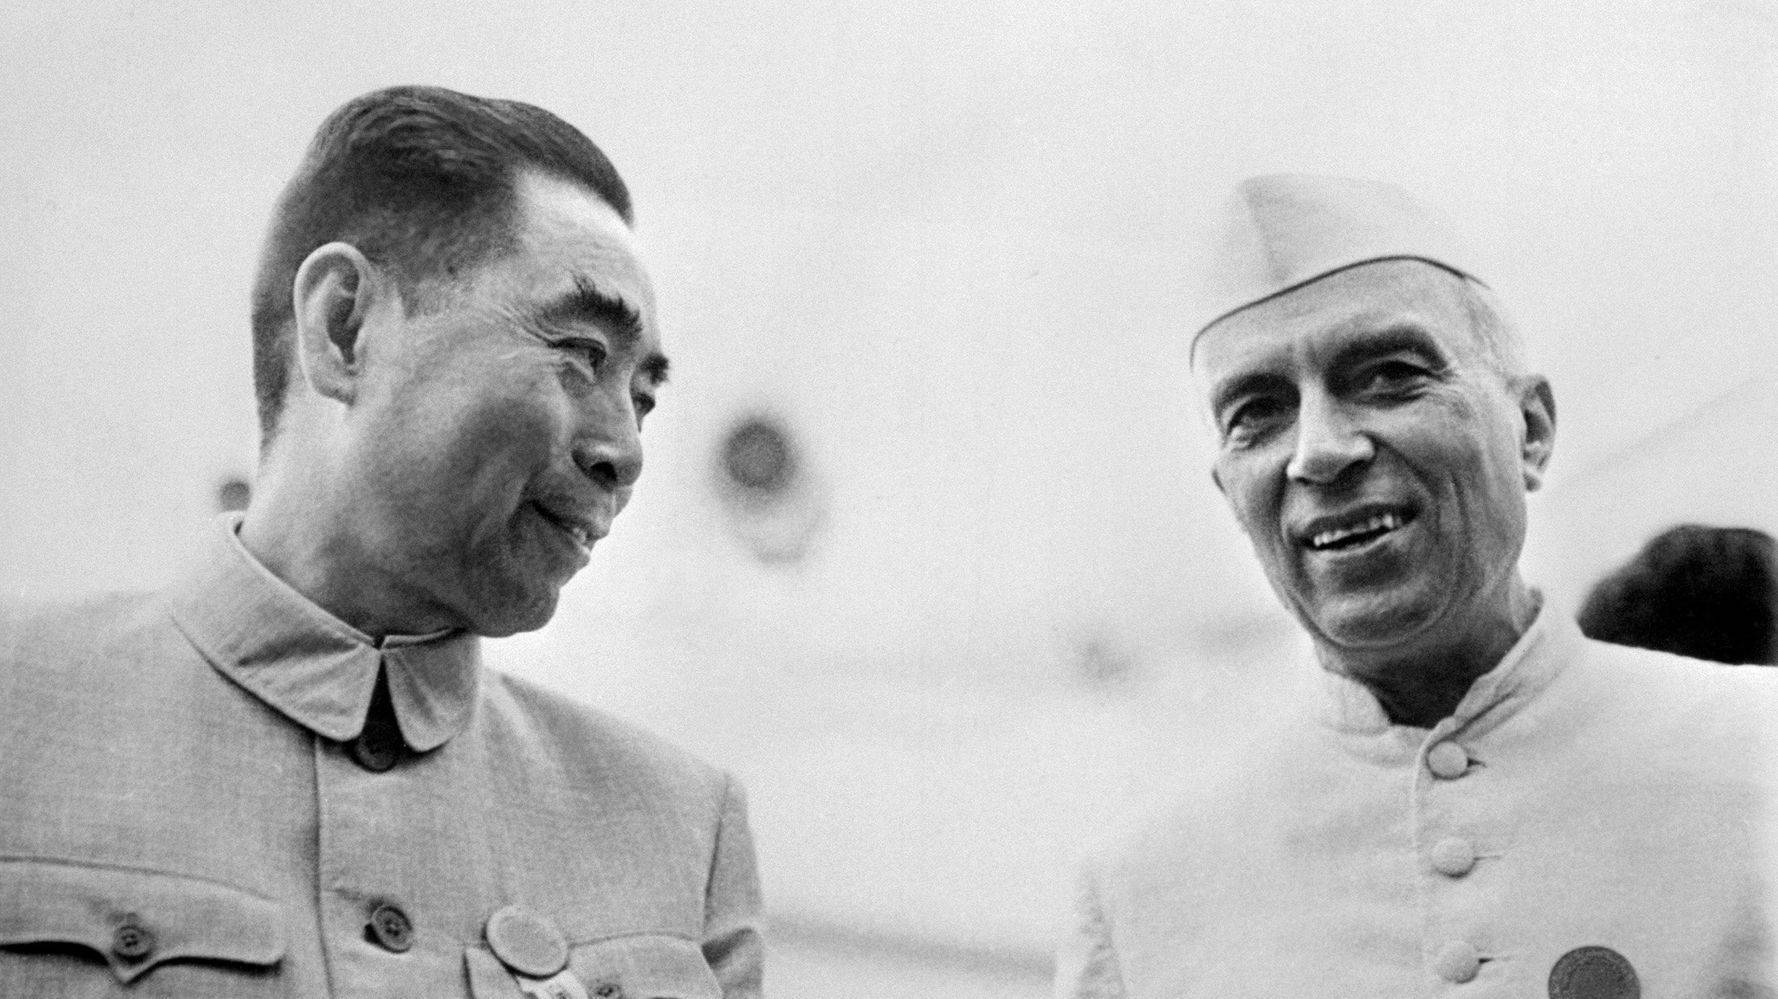 Picture taken from the 50s of Indian prime minister Pandit Jawaharlal Nehru in official visit in China talking with his chinese counterpart Zhou Enlai. Indian statesman and prime minister 1947 64